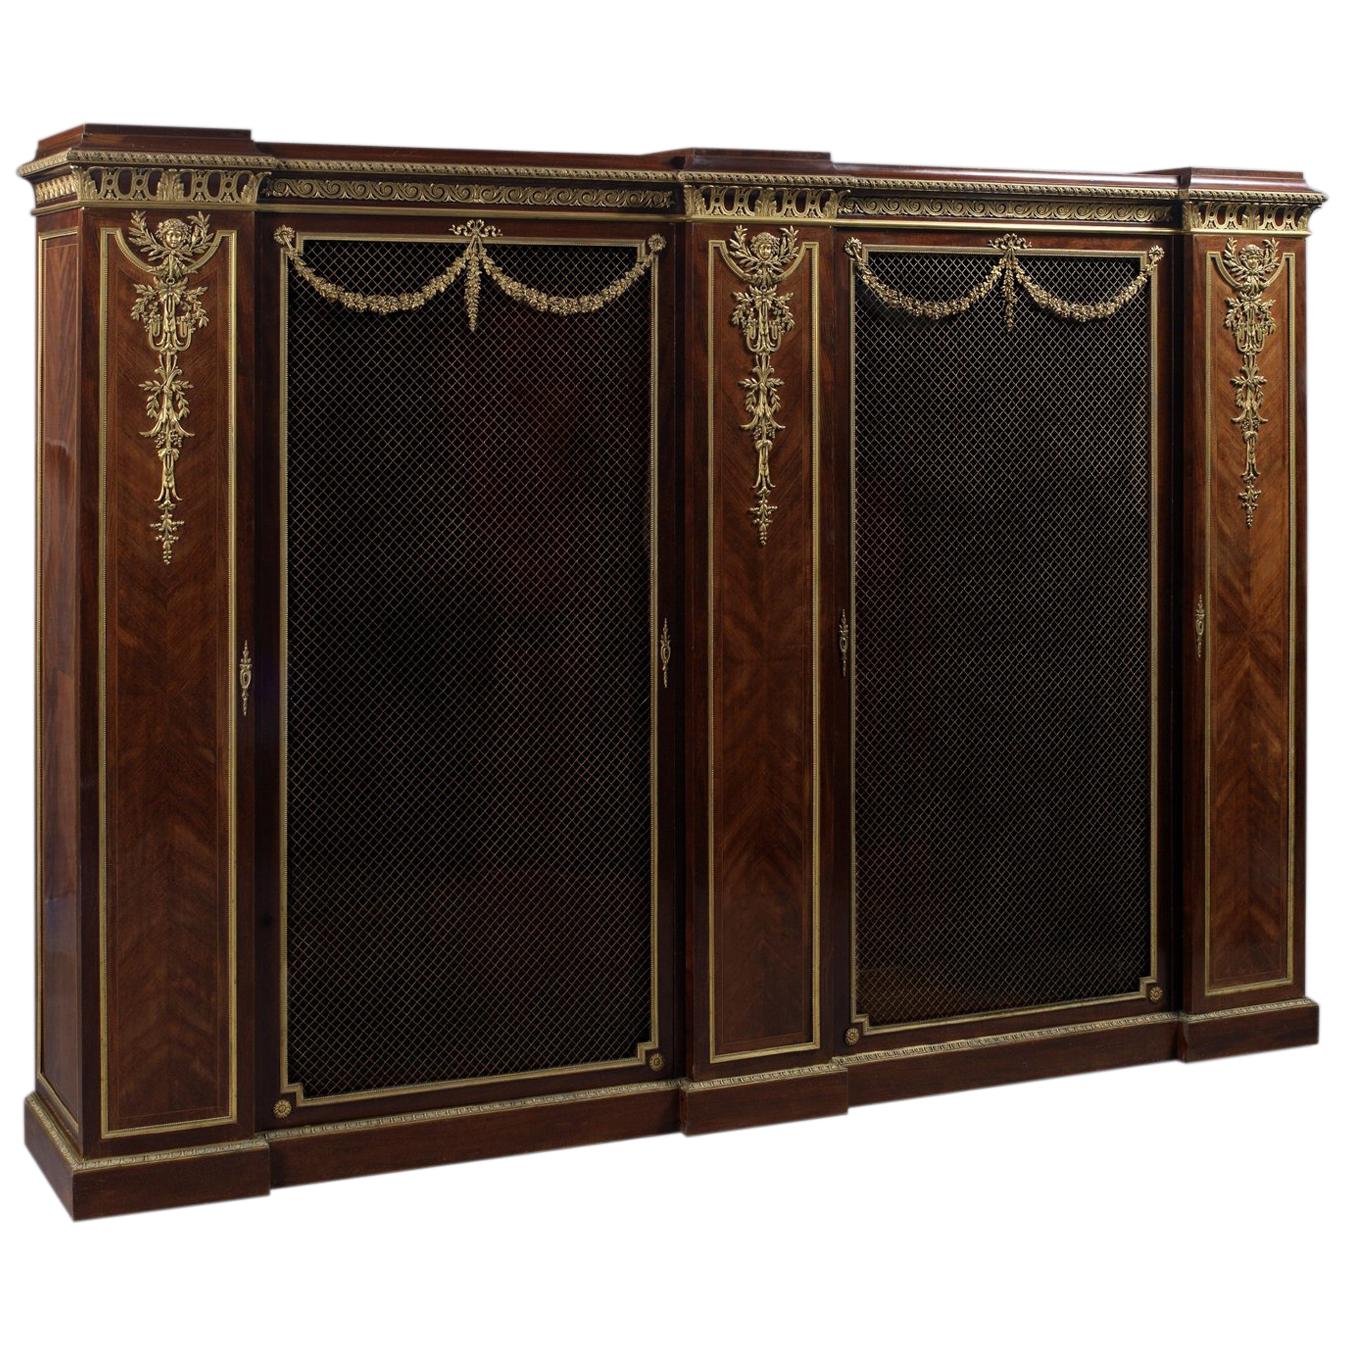 Gilt-Bronze Mounted Mahogany and Satine Bookcase by François Linke, circa 1890 For Sale